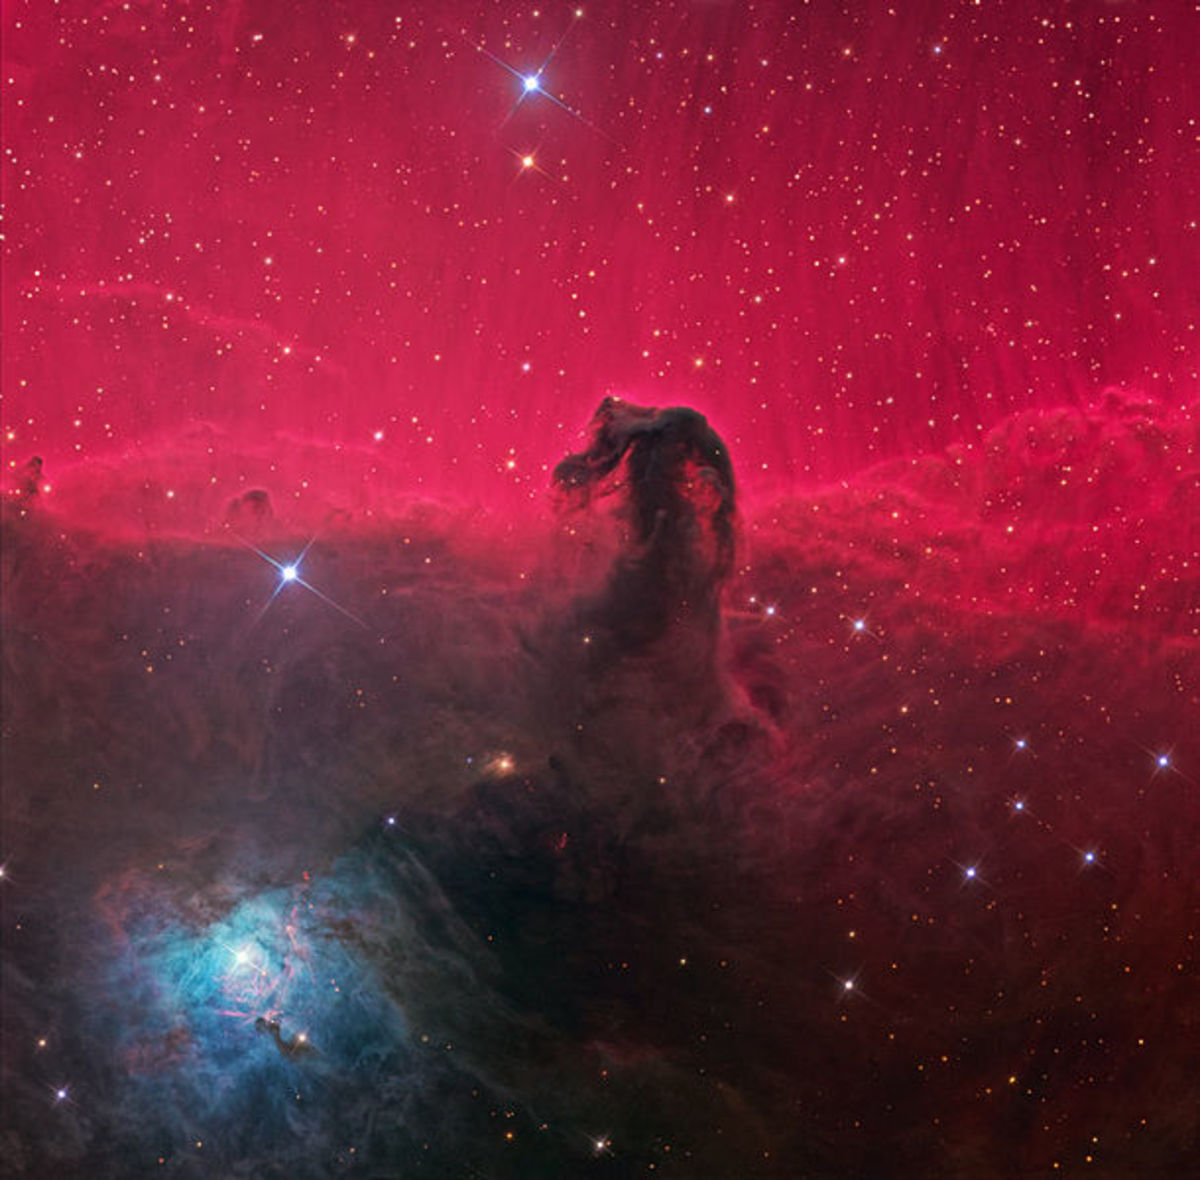  Horsehead Nebula (also known as Barnard 33 in emission nebula IC 434) is a dark nebula in the constellation Orion. First recorded by Ms. Fleming in 1888.